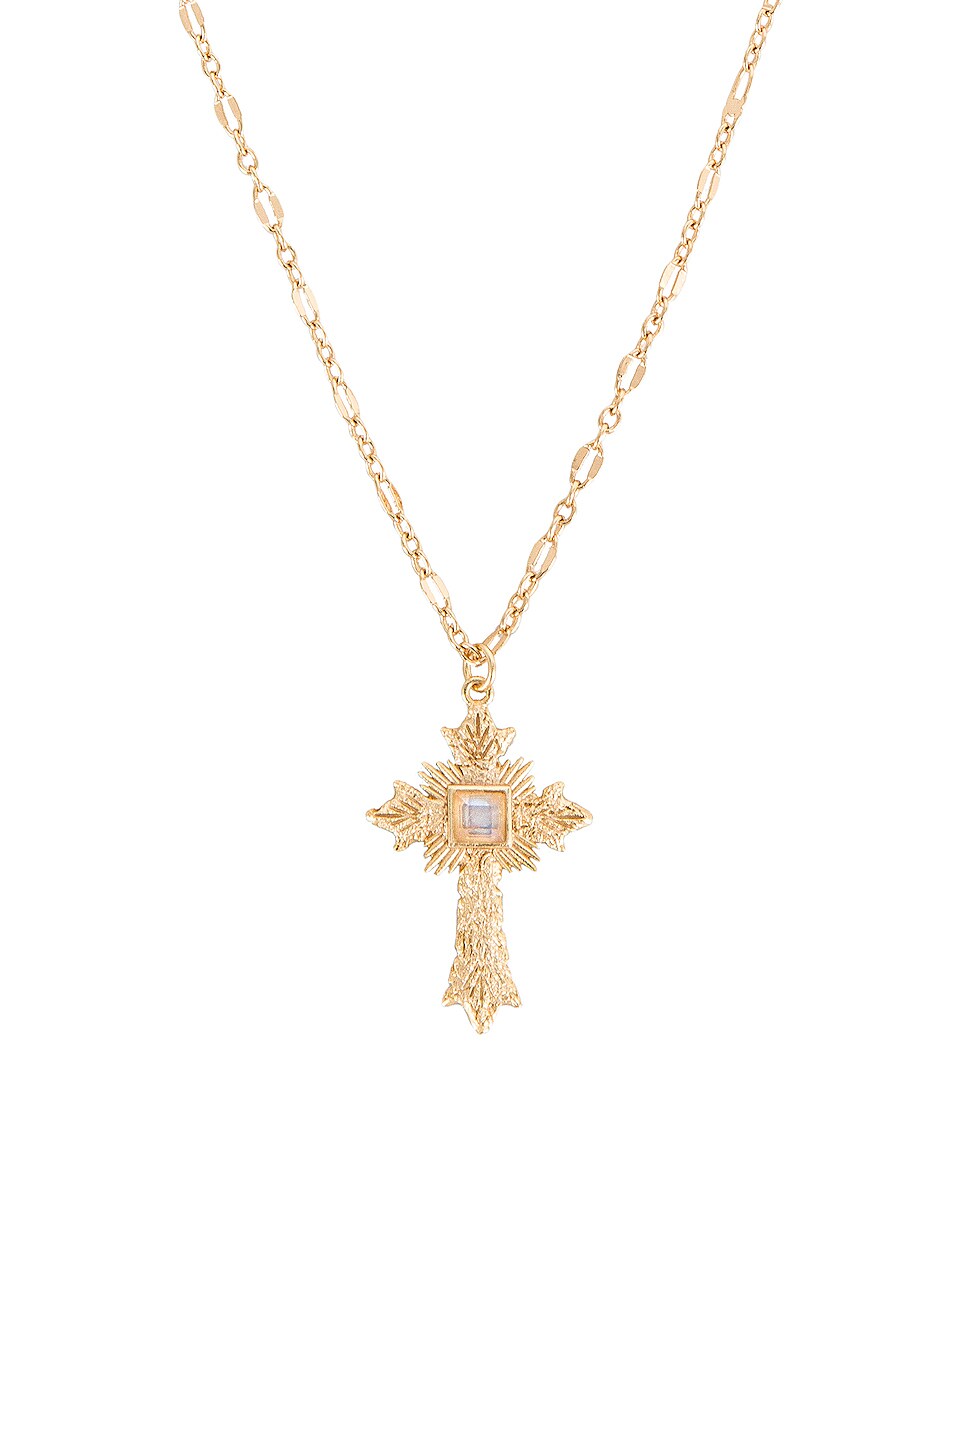 A sparkling gold cross pendant is enhanced with a moonstone gem set in the middle of the cross.  This perfect necklace needs a place in your jewelry box.  Color- Gold and moonstone. Moonstone gem. 22-inch length with a 2-inch extender. Pendant measures approximately 1 inch. 14 kt gold plate over brass.